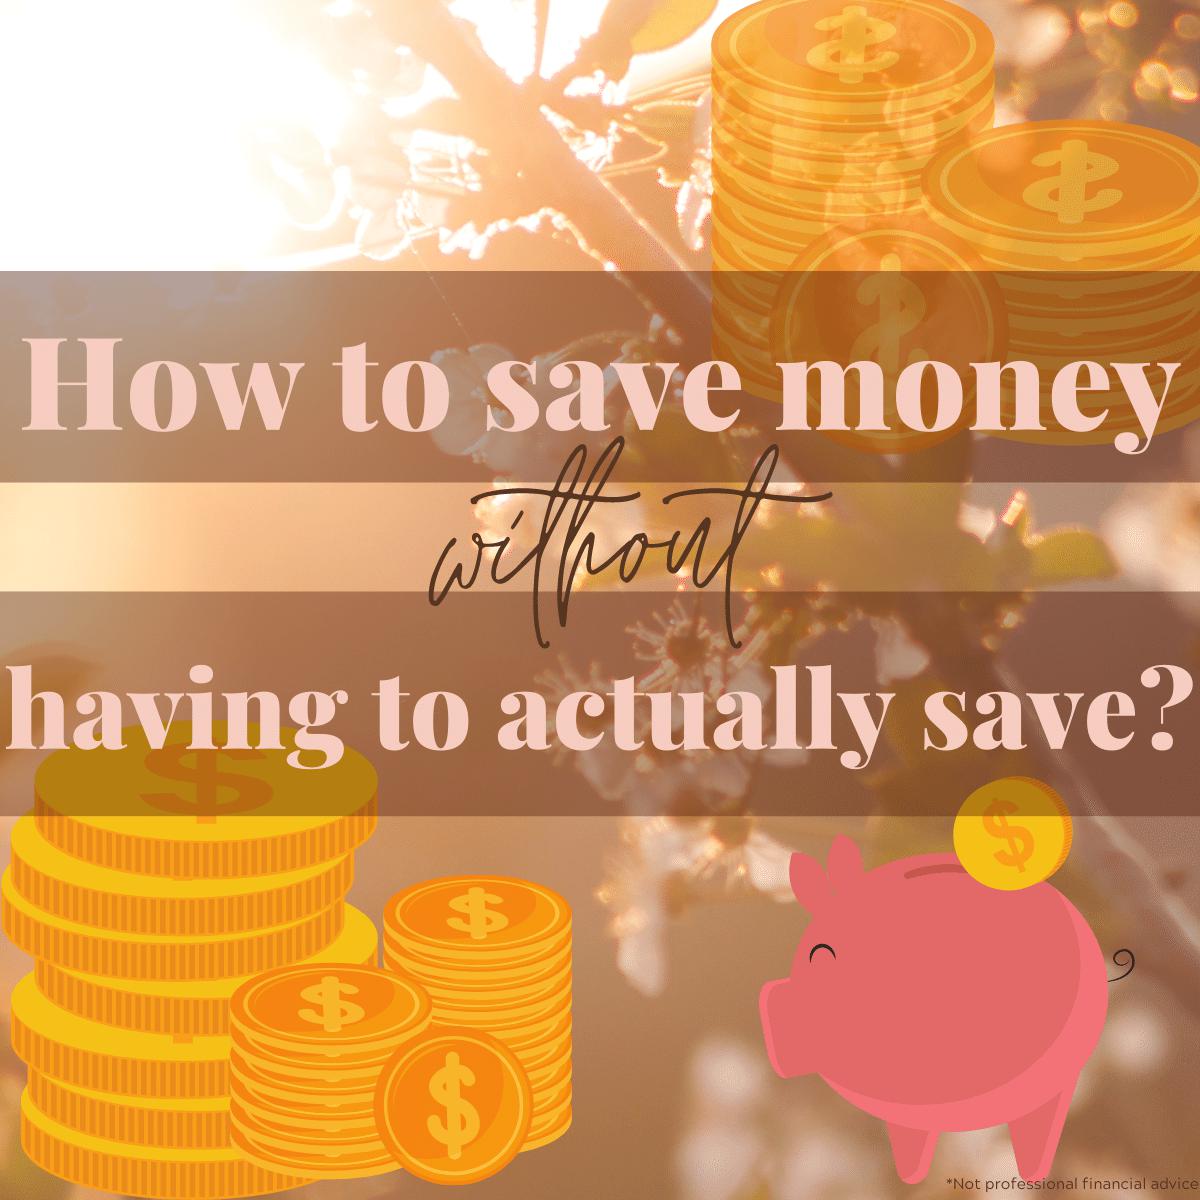 How to save money without saving money